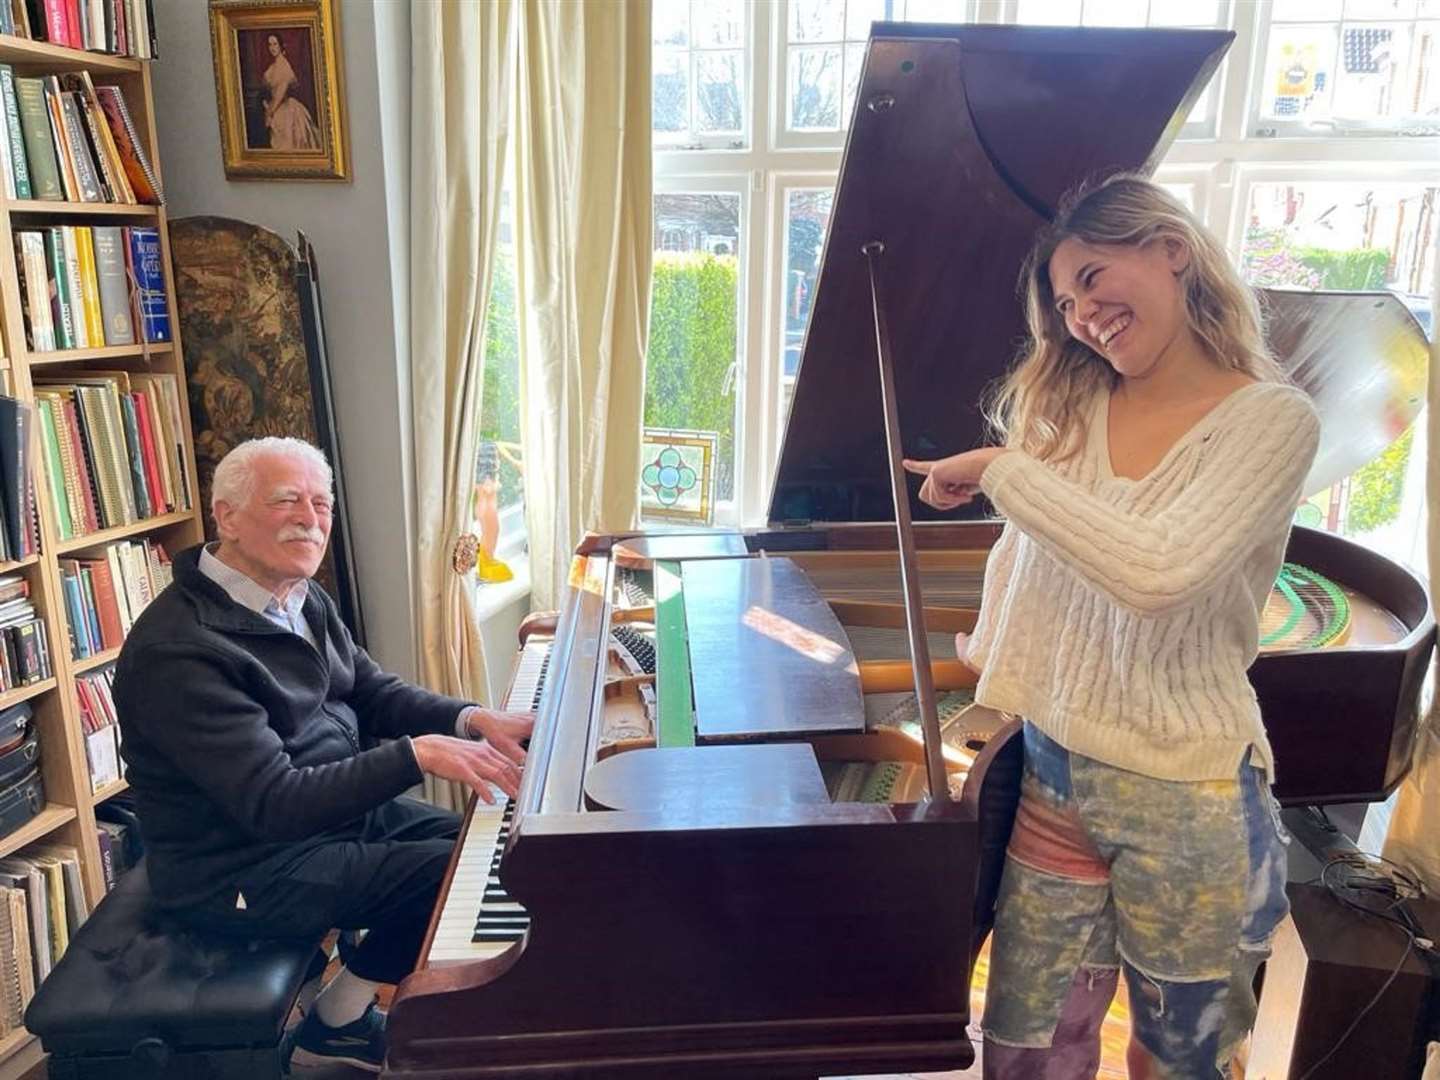 Alan Melinek playing the piano with his granddaughter Bella (Cancer Research UK/pianograndad.com)